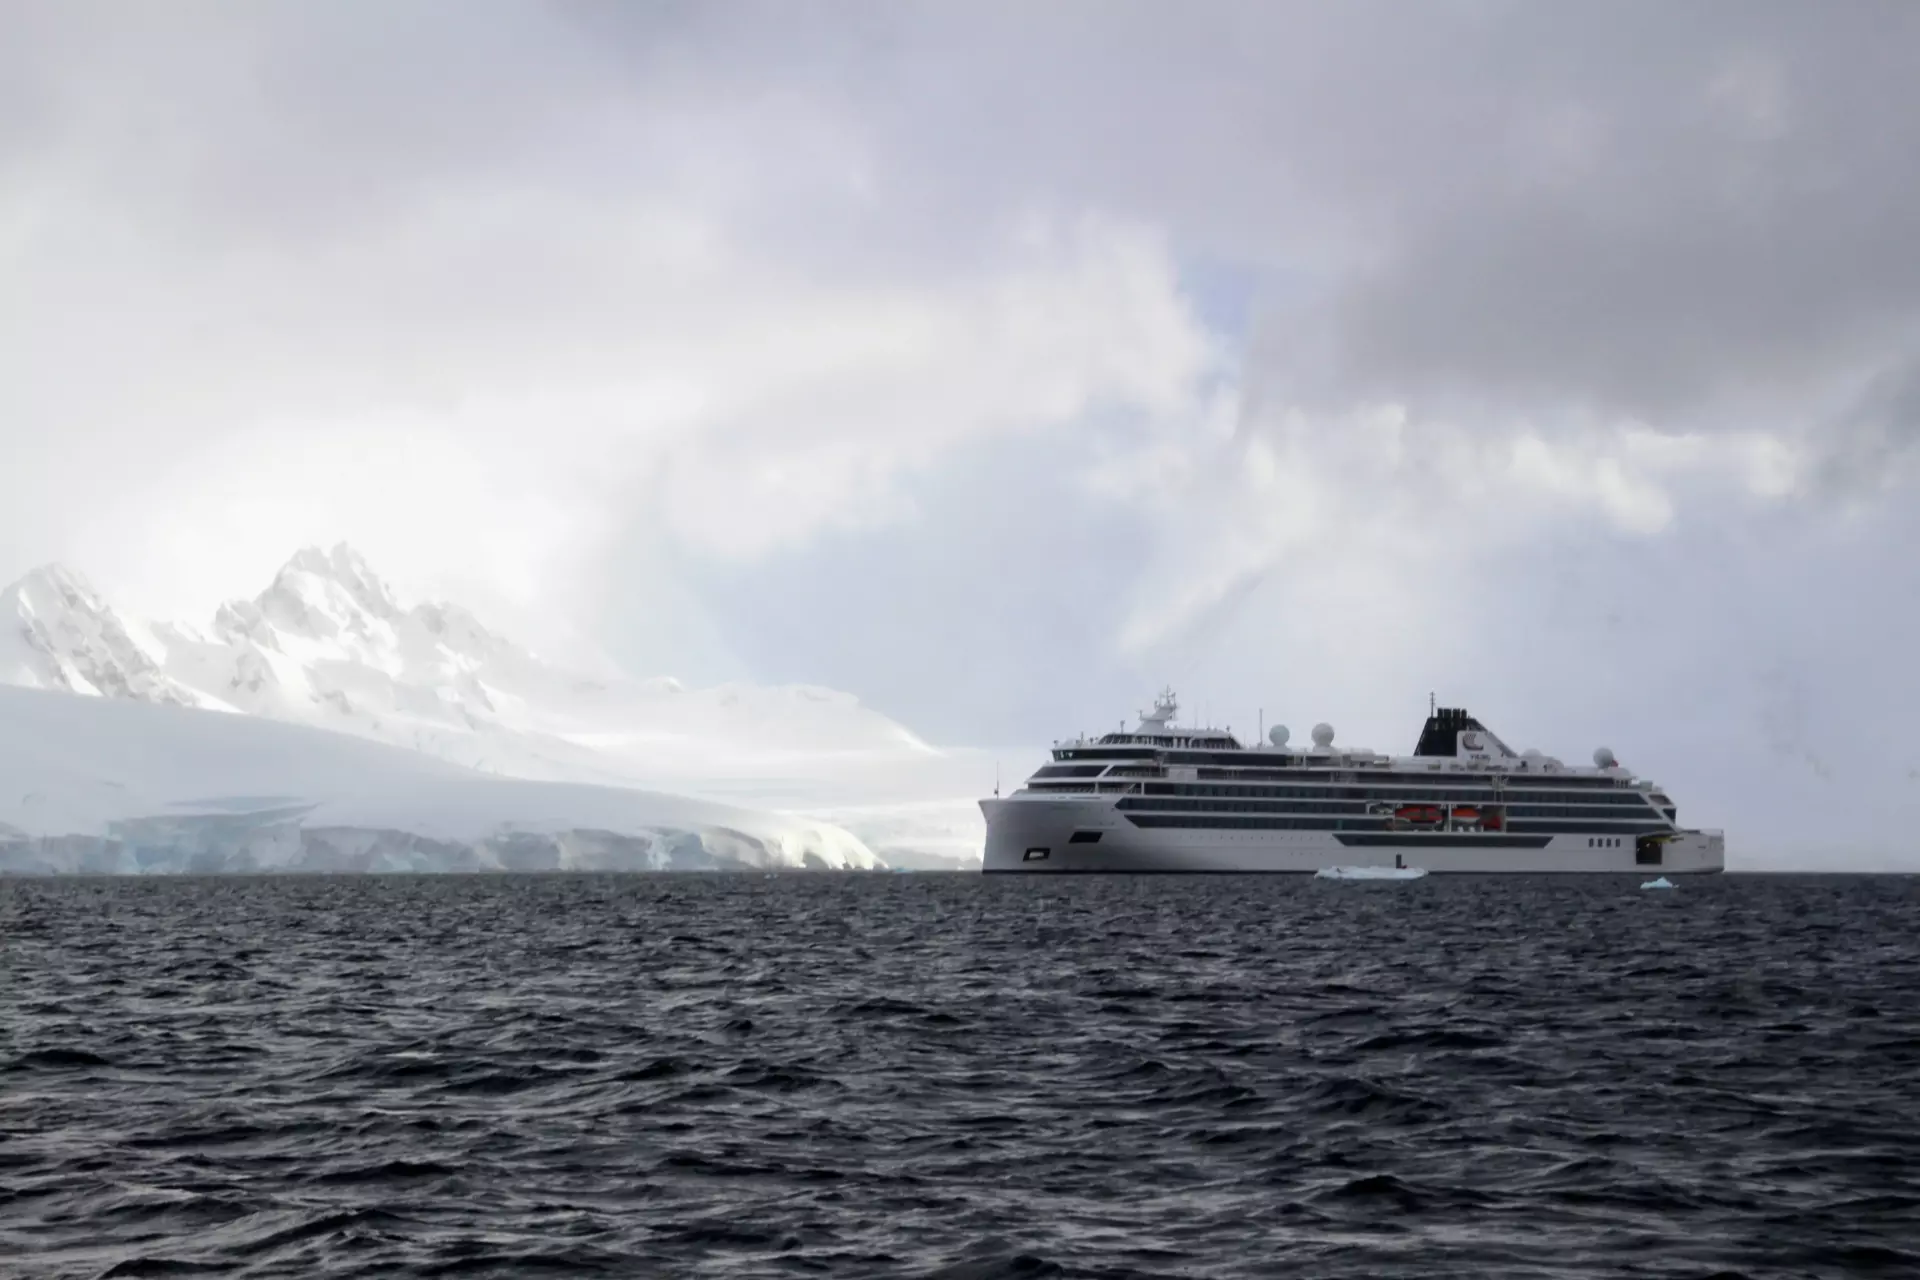 Cruise ship in the Antarctic